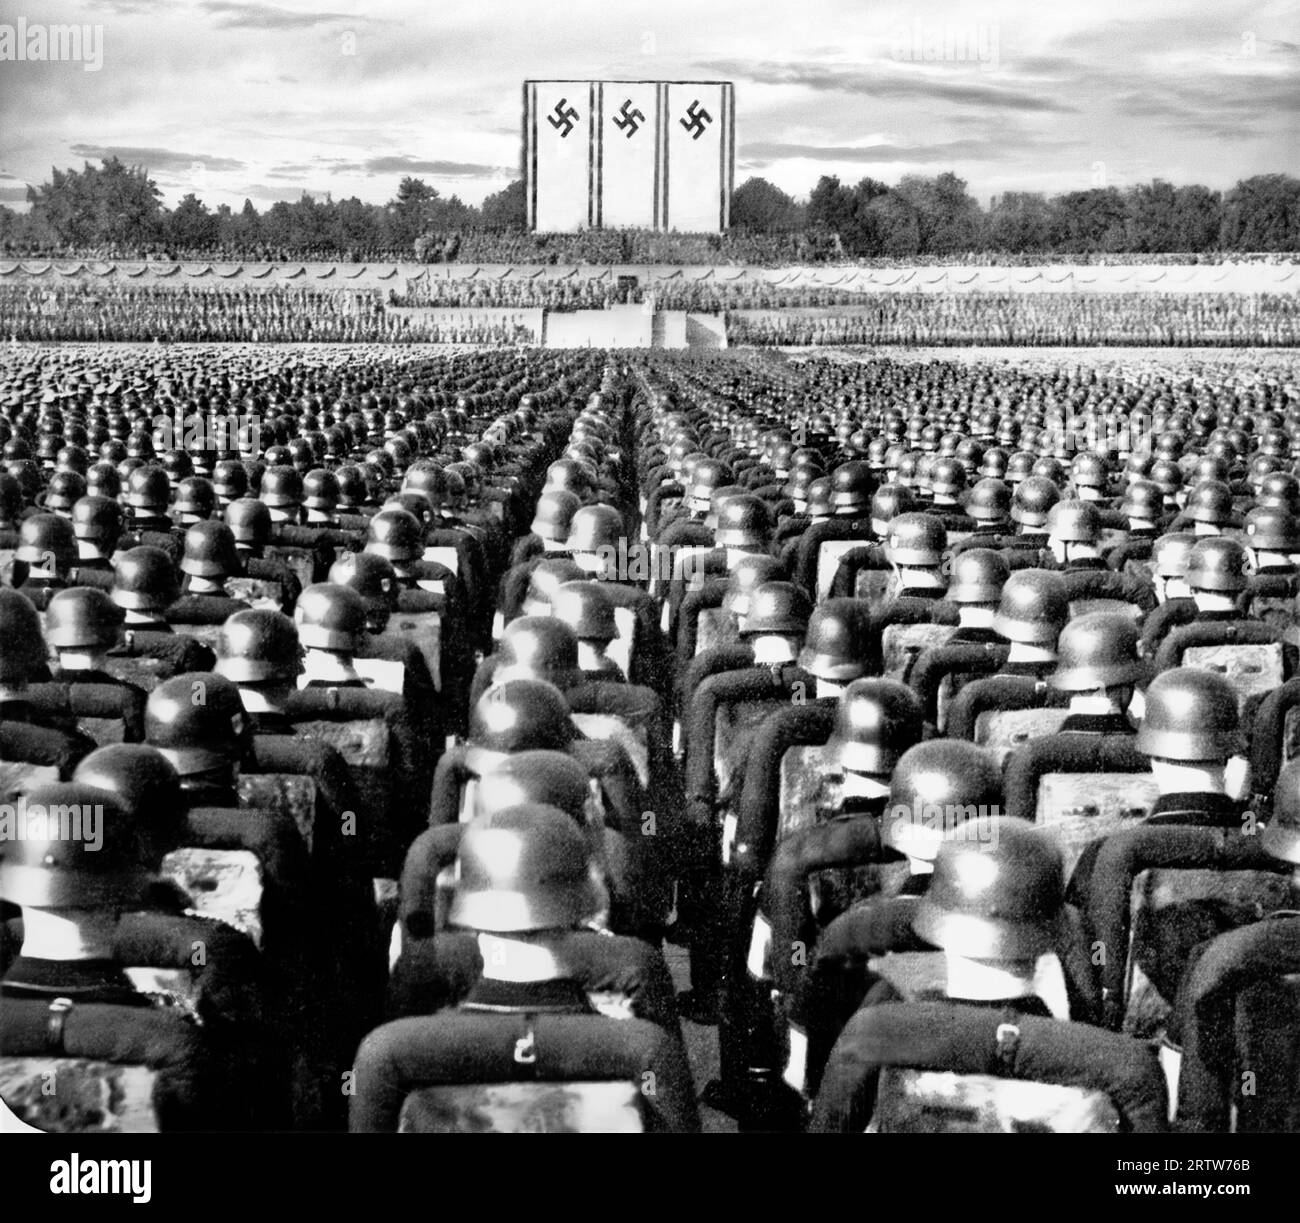 1936 German army troops in lines during a Nuremberg rally, aka Reich Party Congress, a series of celebratory events coordinated by the Nazi Party in Germany. Stock Photo